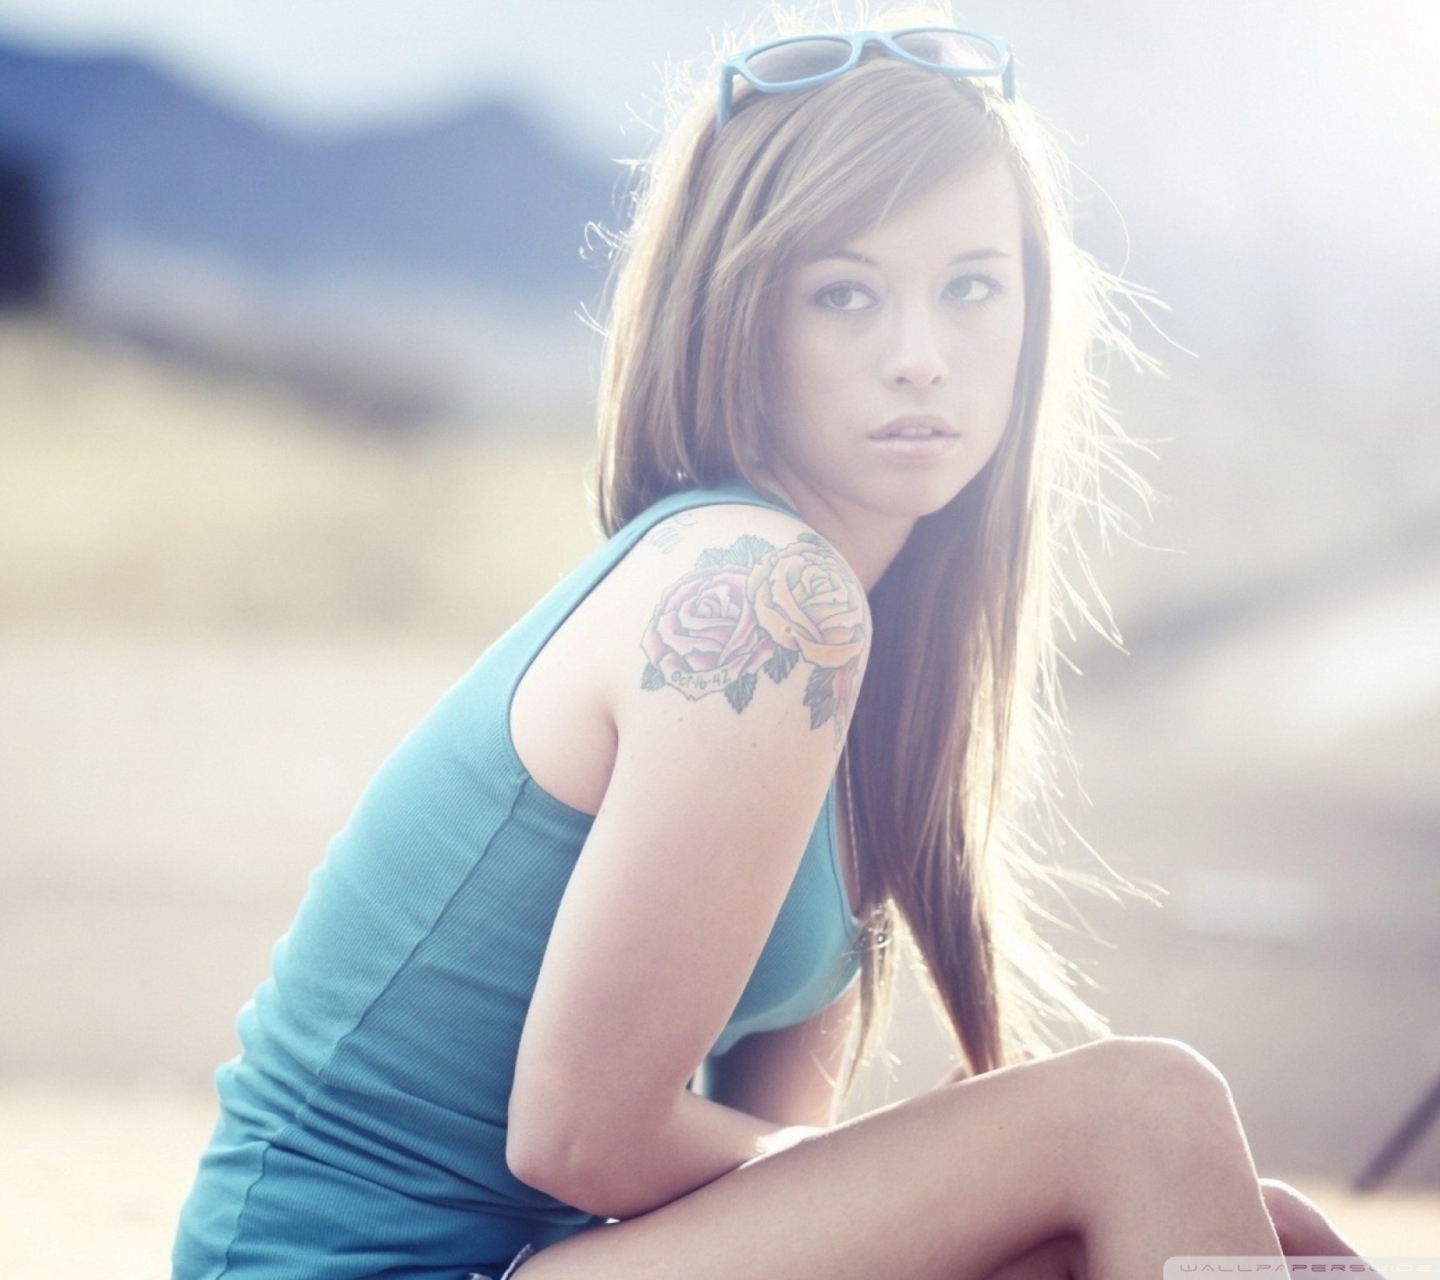 Das Beautiful Girl With Long Blonde Hair And Rose Tattoo Wallpaper 1440x1280